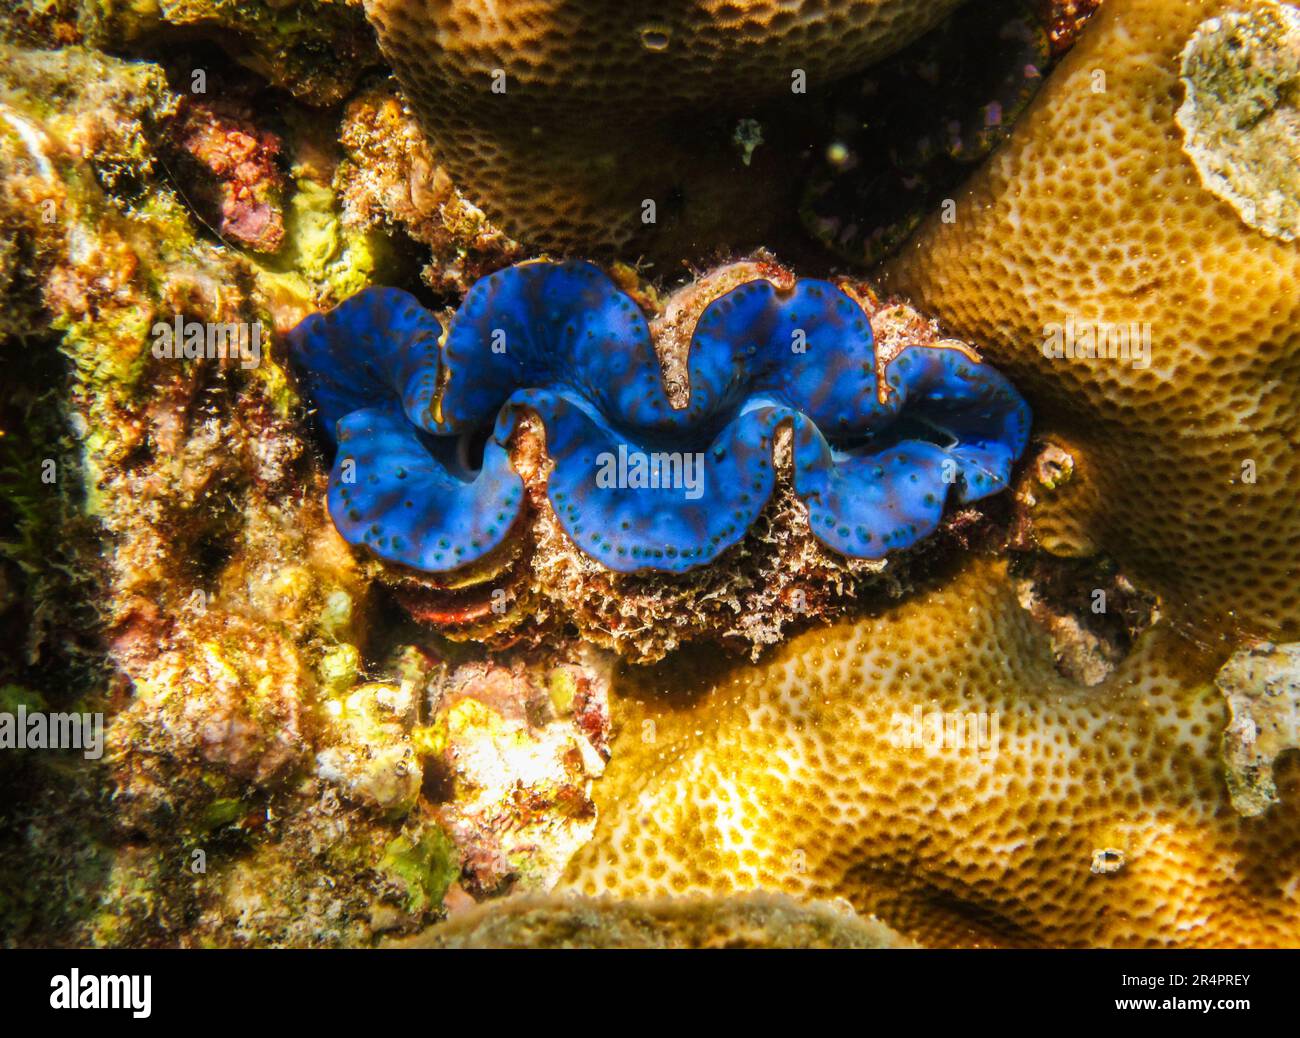 A Fluted Giant Clam (Tridacna squamosa) in the Red Sea, Egypt. Blue shell tridacna in the coral reef of the Red sea Stock Photo